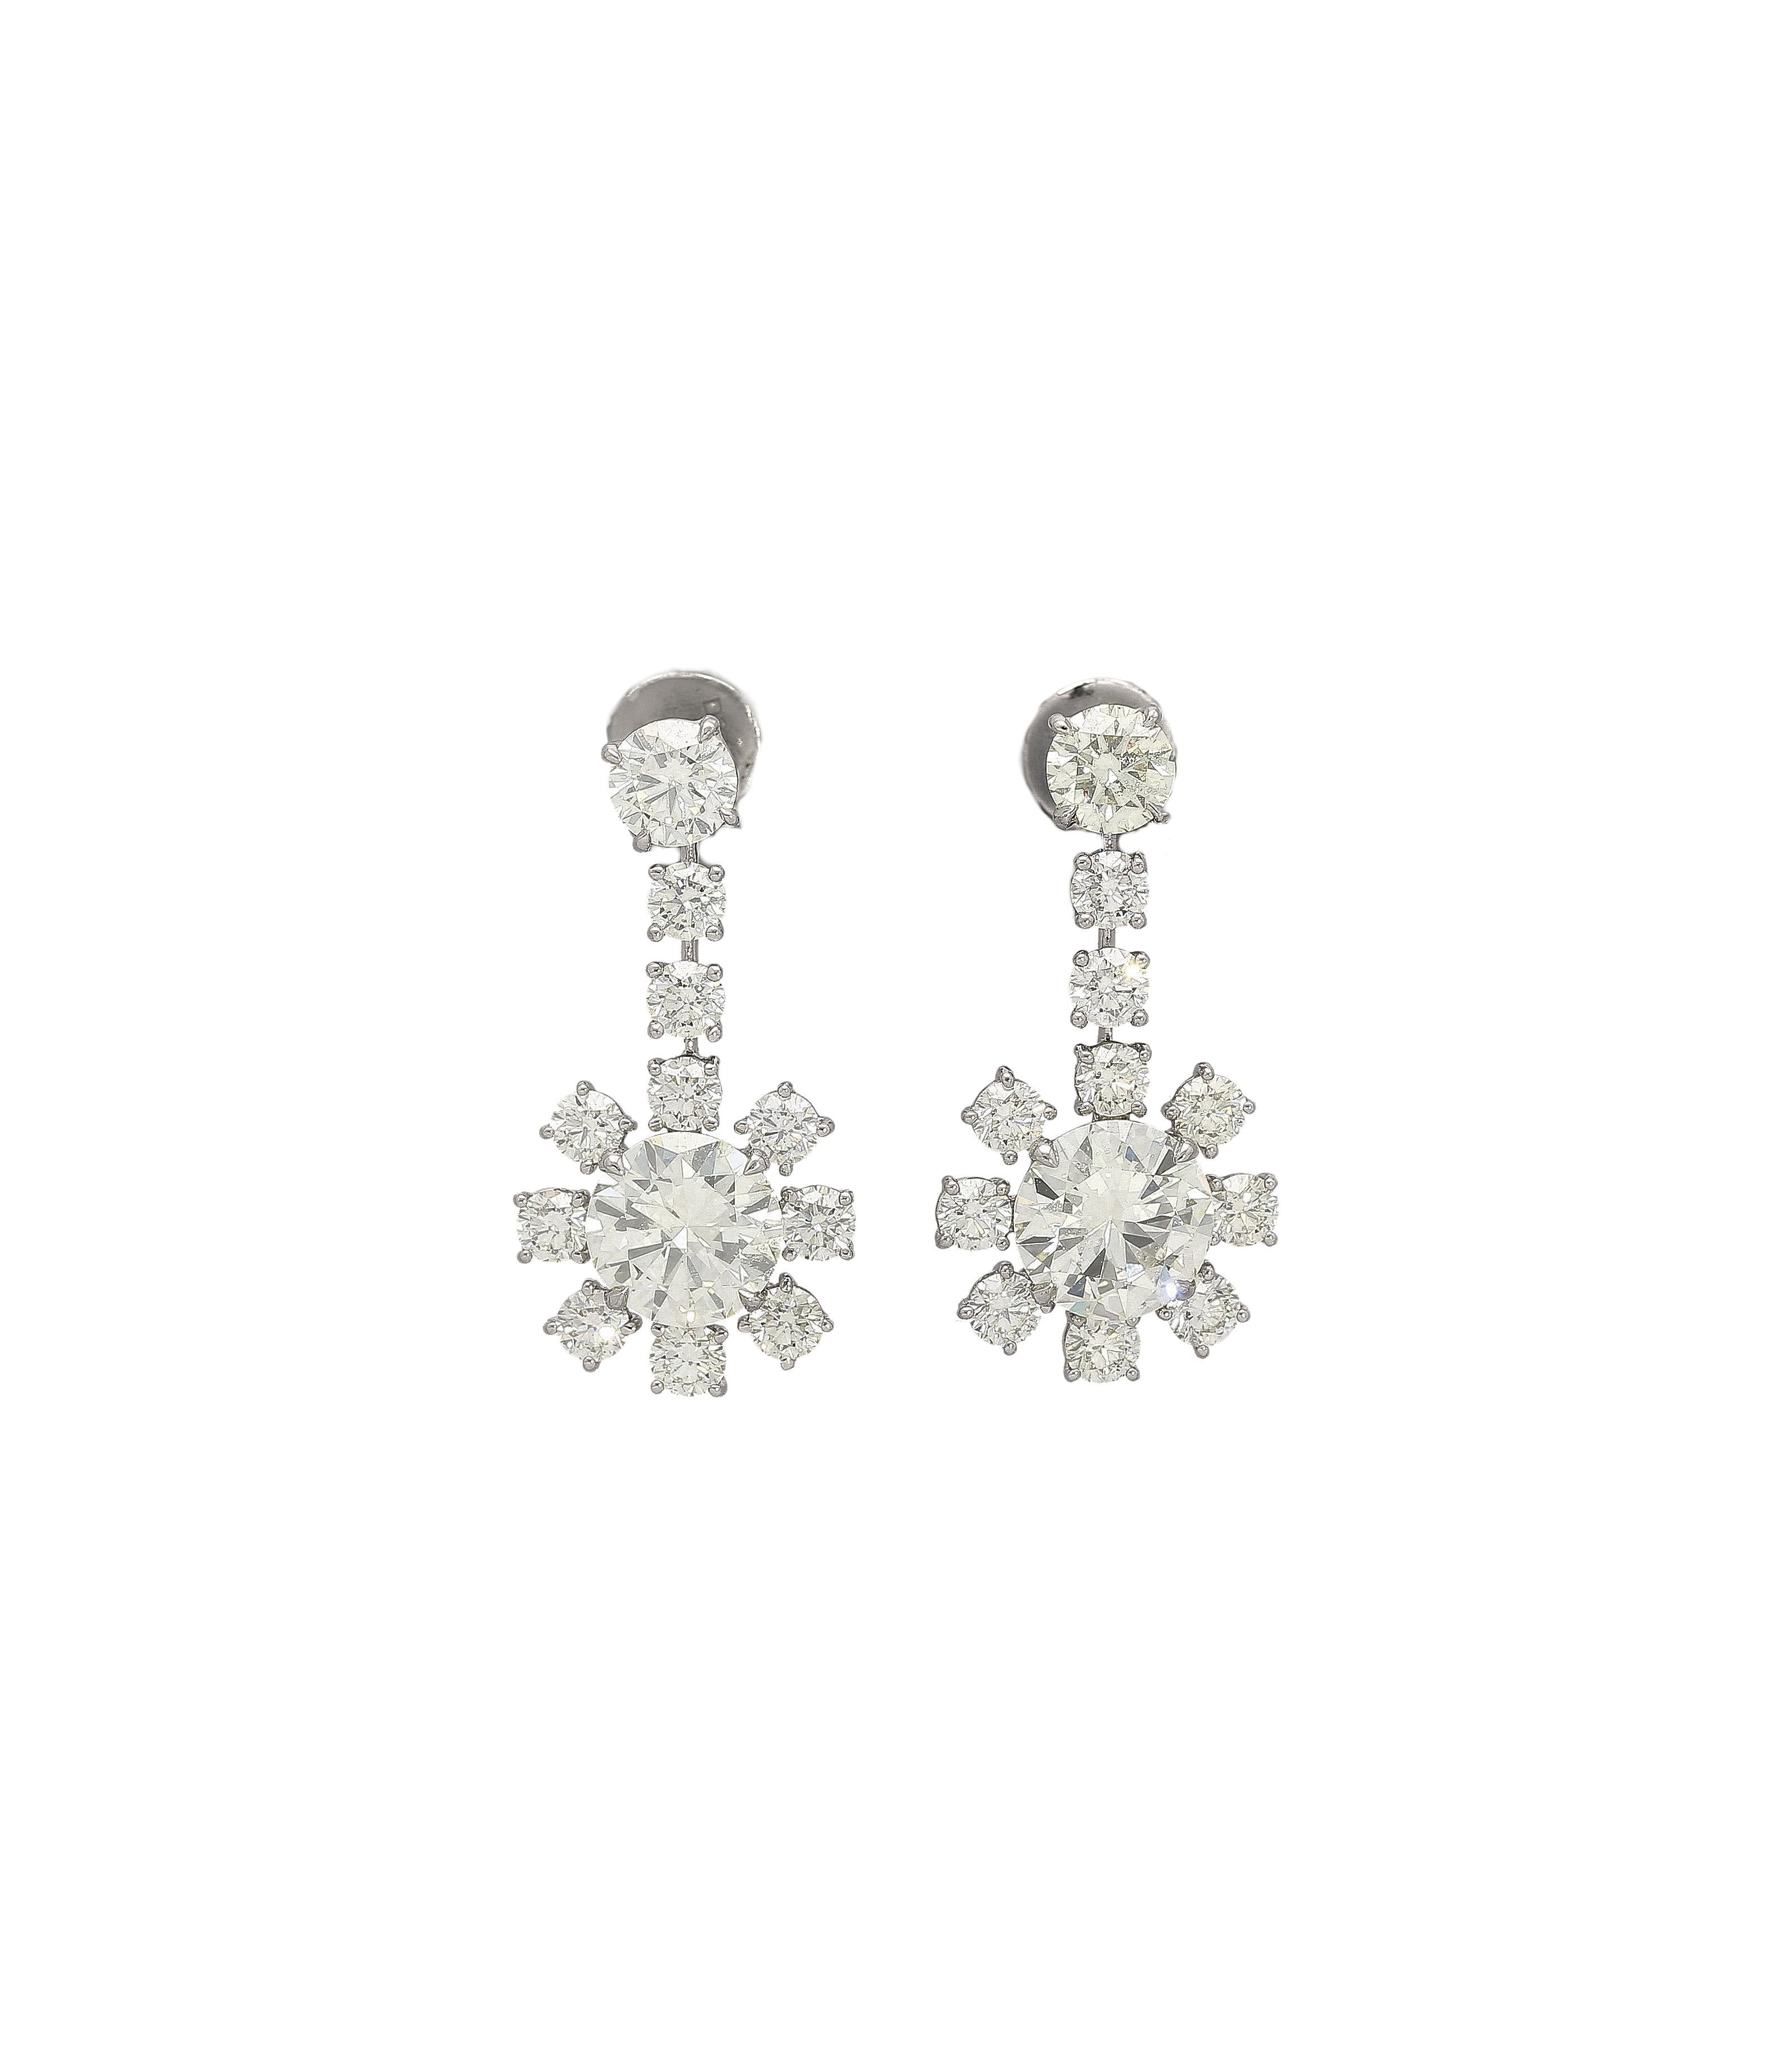 Jewelry Details:
- Item Type: Earrings
- Metal Type: 18K White Gold
- Gemstones: White Diamond
- Weight: 6.42 grams
- Size: 3.15cm long (each)
- Era: Contemporary

Center Stone Details (Each Earring):
- Gemstone Type: Diamond
- Carat: 2.45 Carats